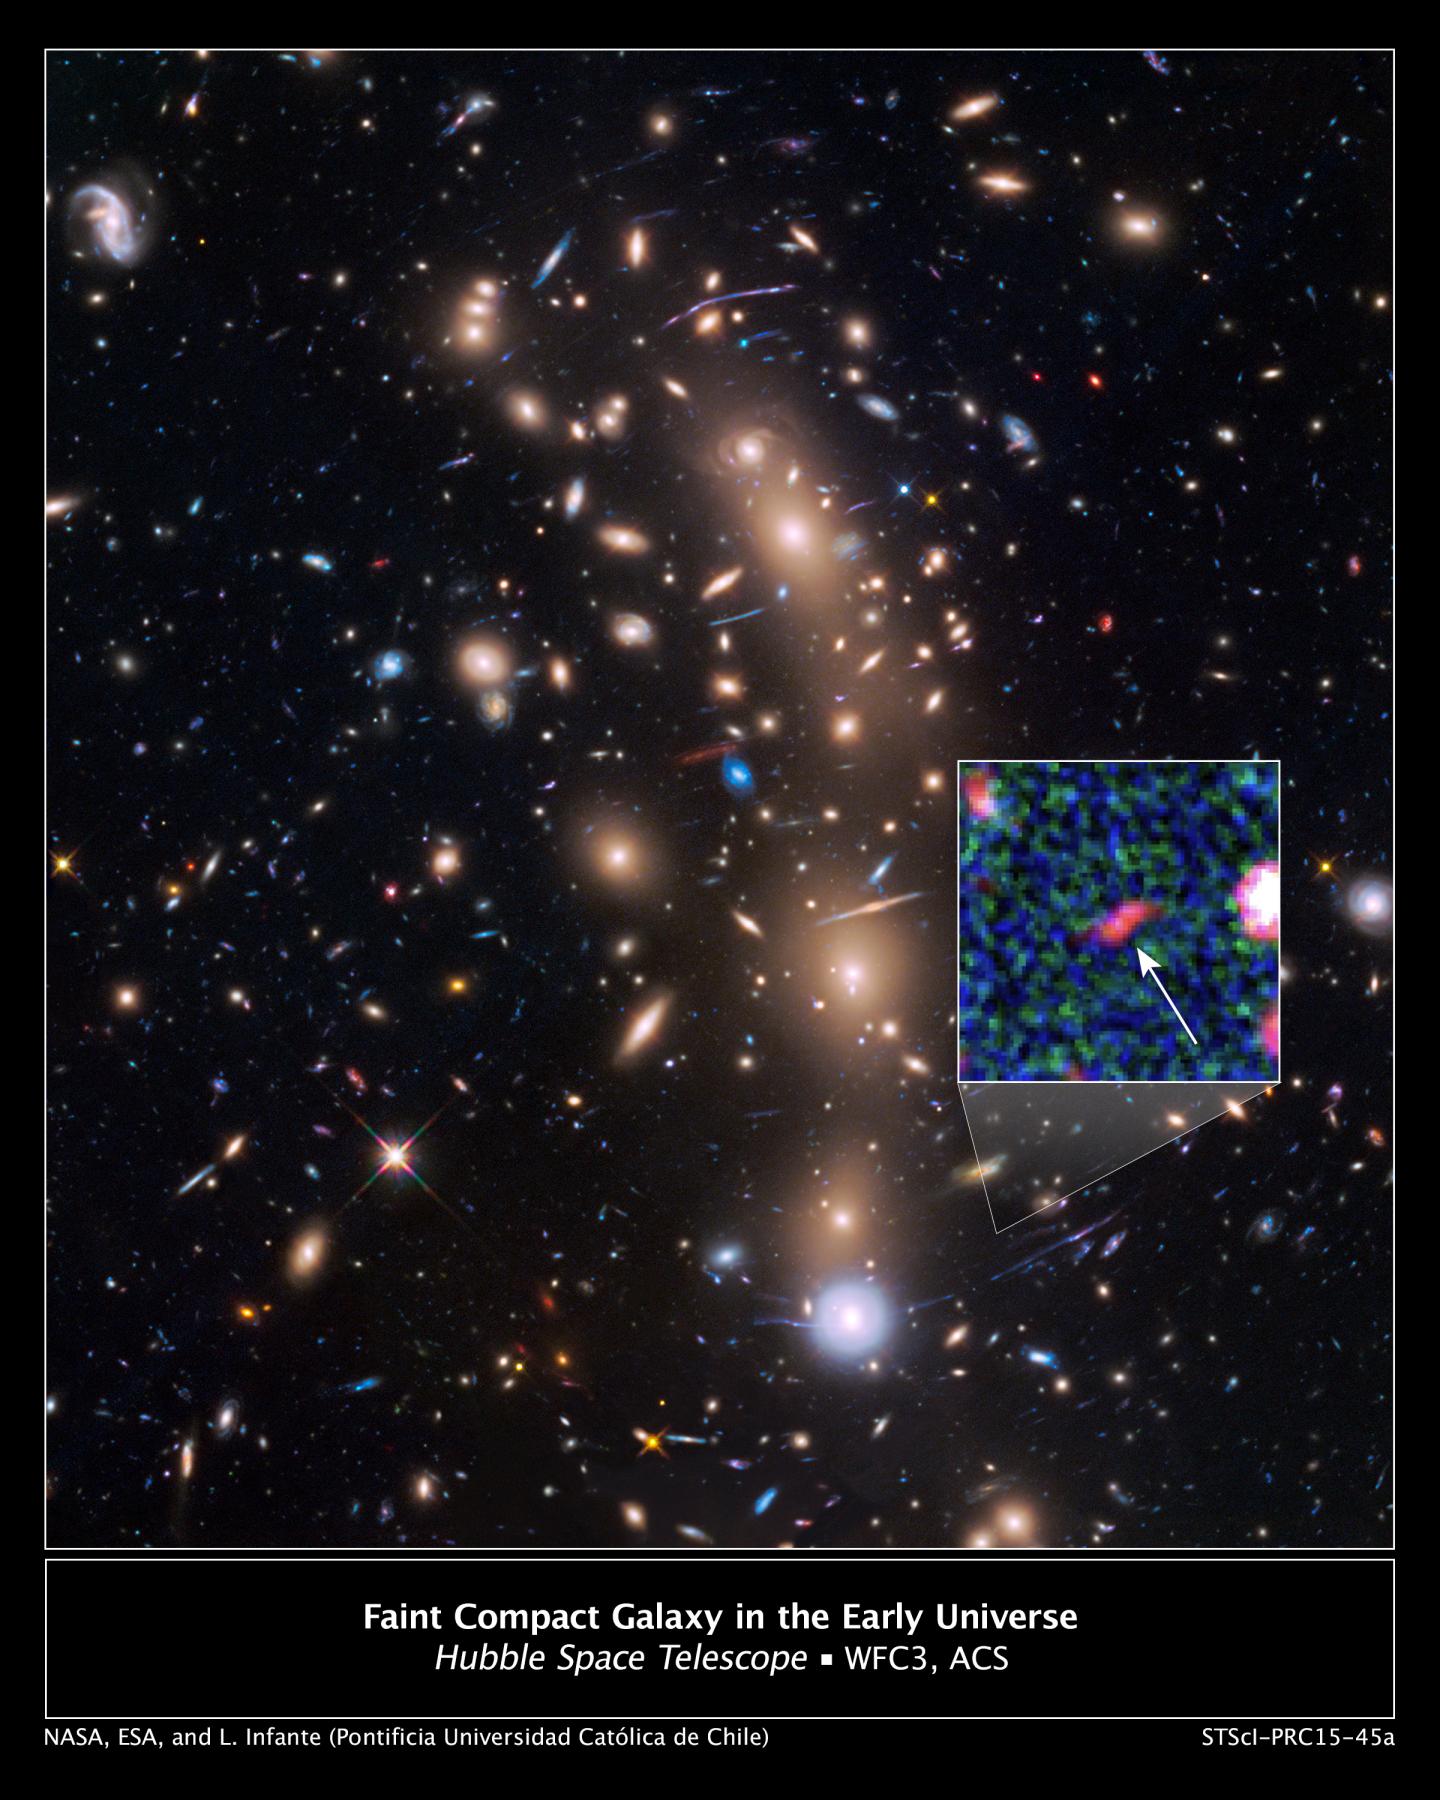 Hubble Space Telescope View of a Very Massive Cluster of Galaxies, MACS J0416.1-2403